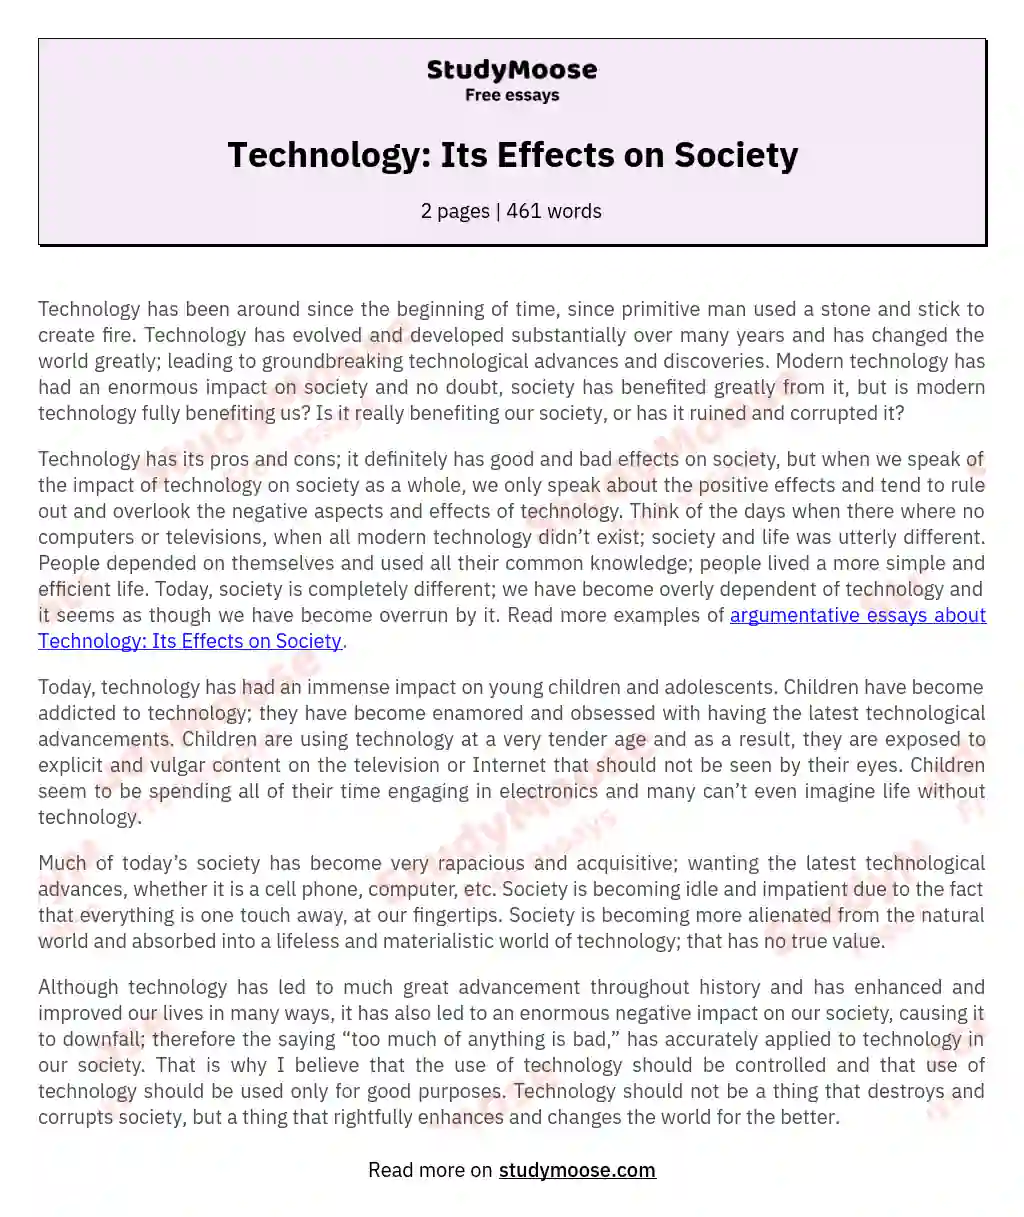 Technology: Its Effects on Society essay